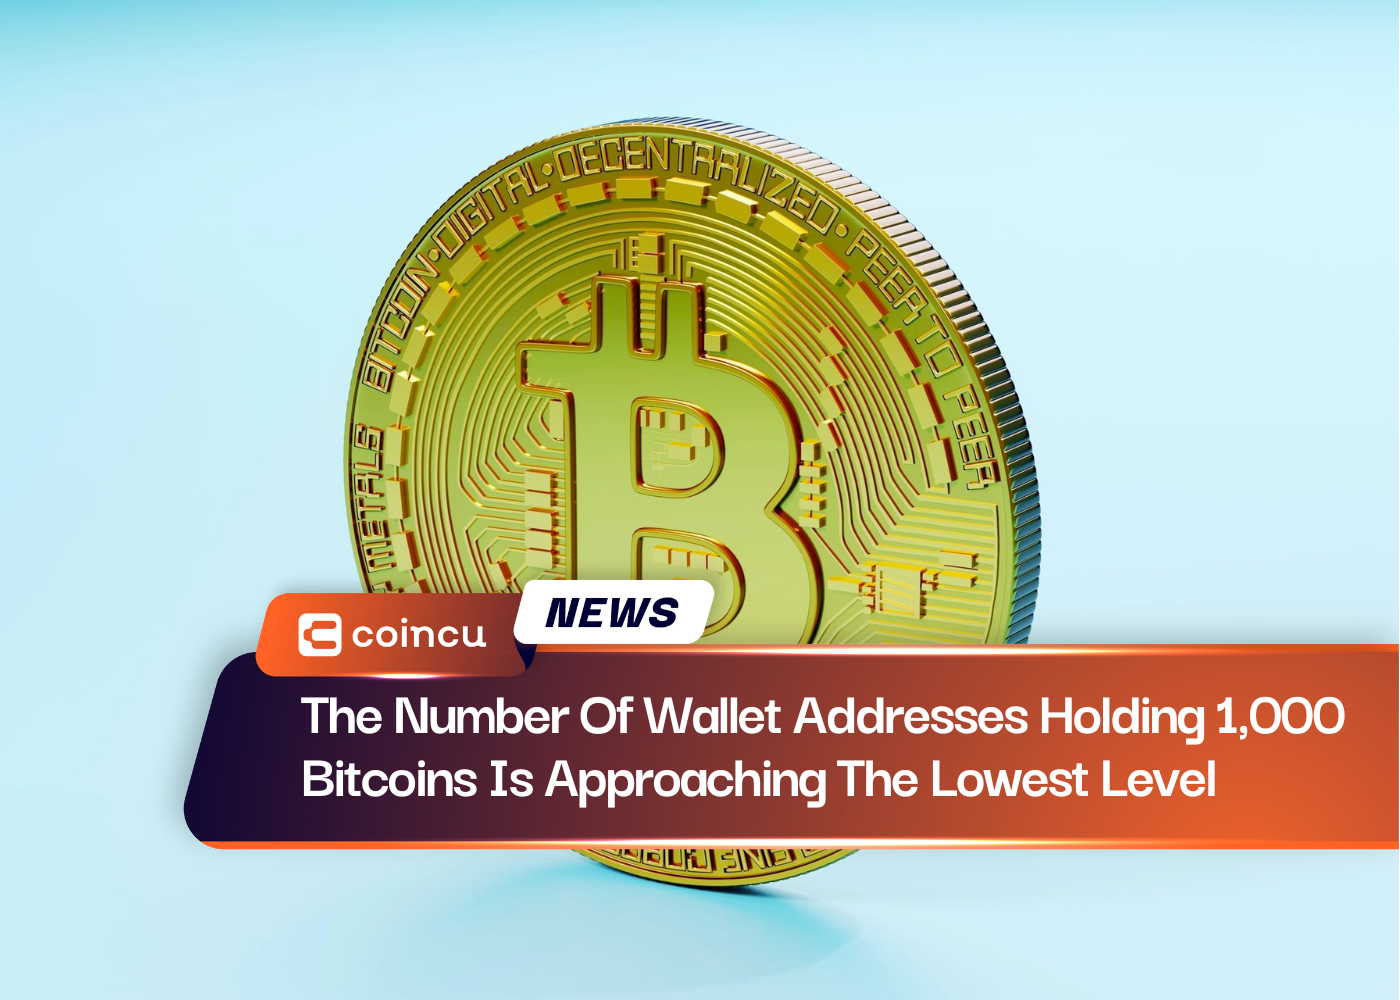 The Number Of Wallet Addresses Holding 1,000 Bitcoins Is Approaching The Lowest Level